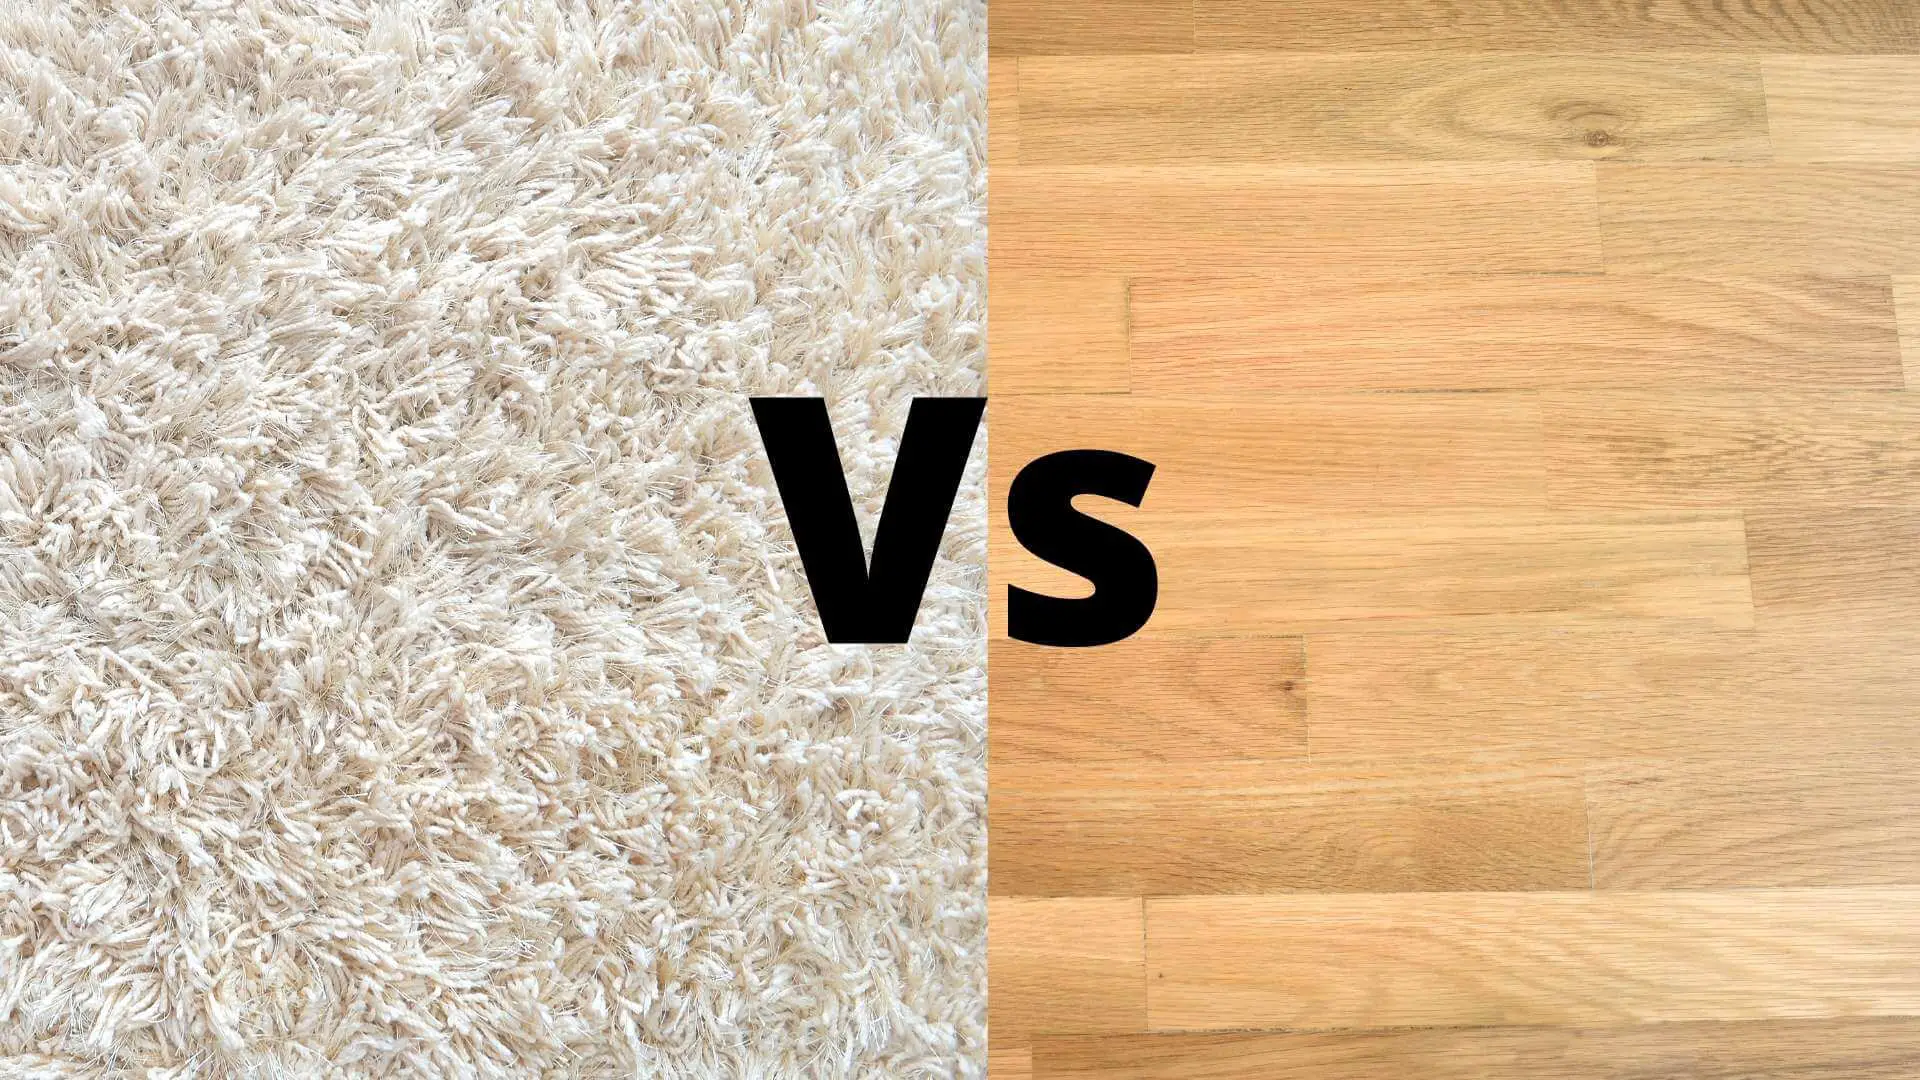 which is healthier between carpet and hardwood